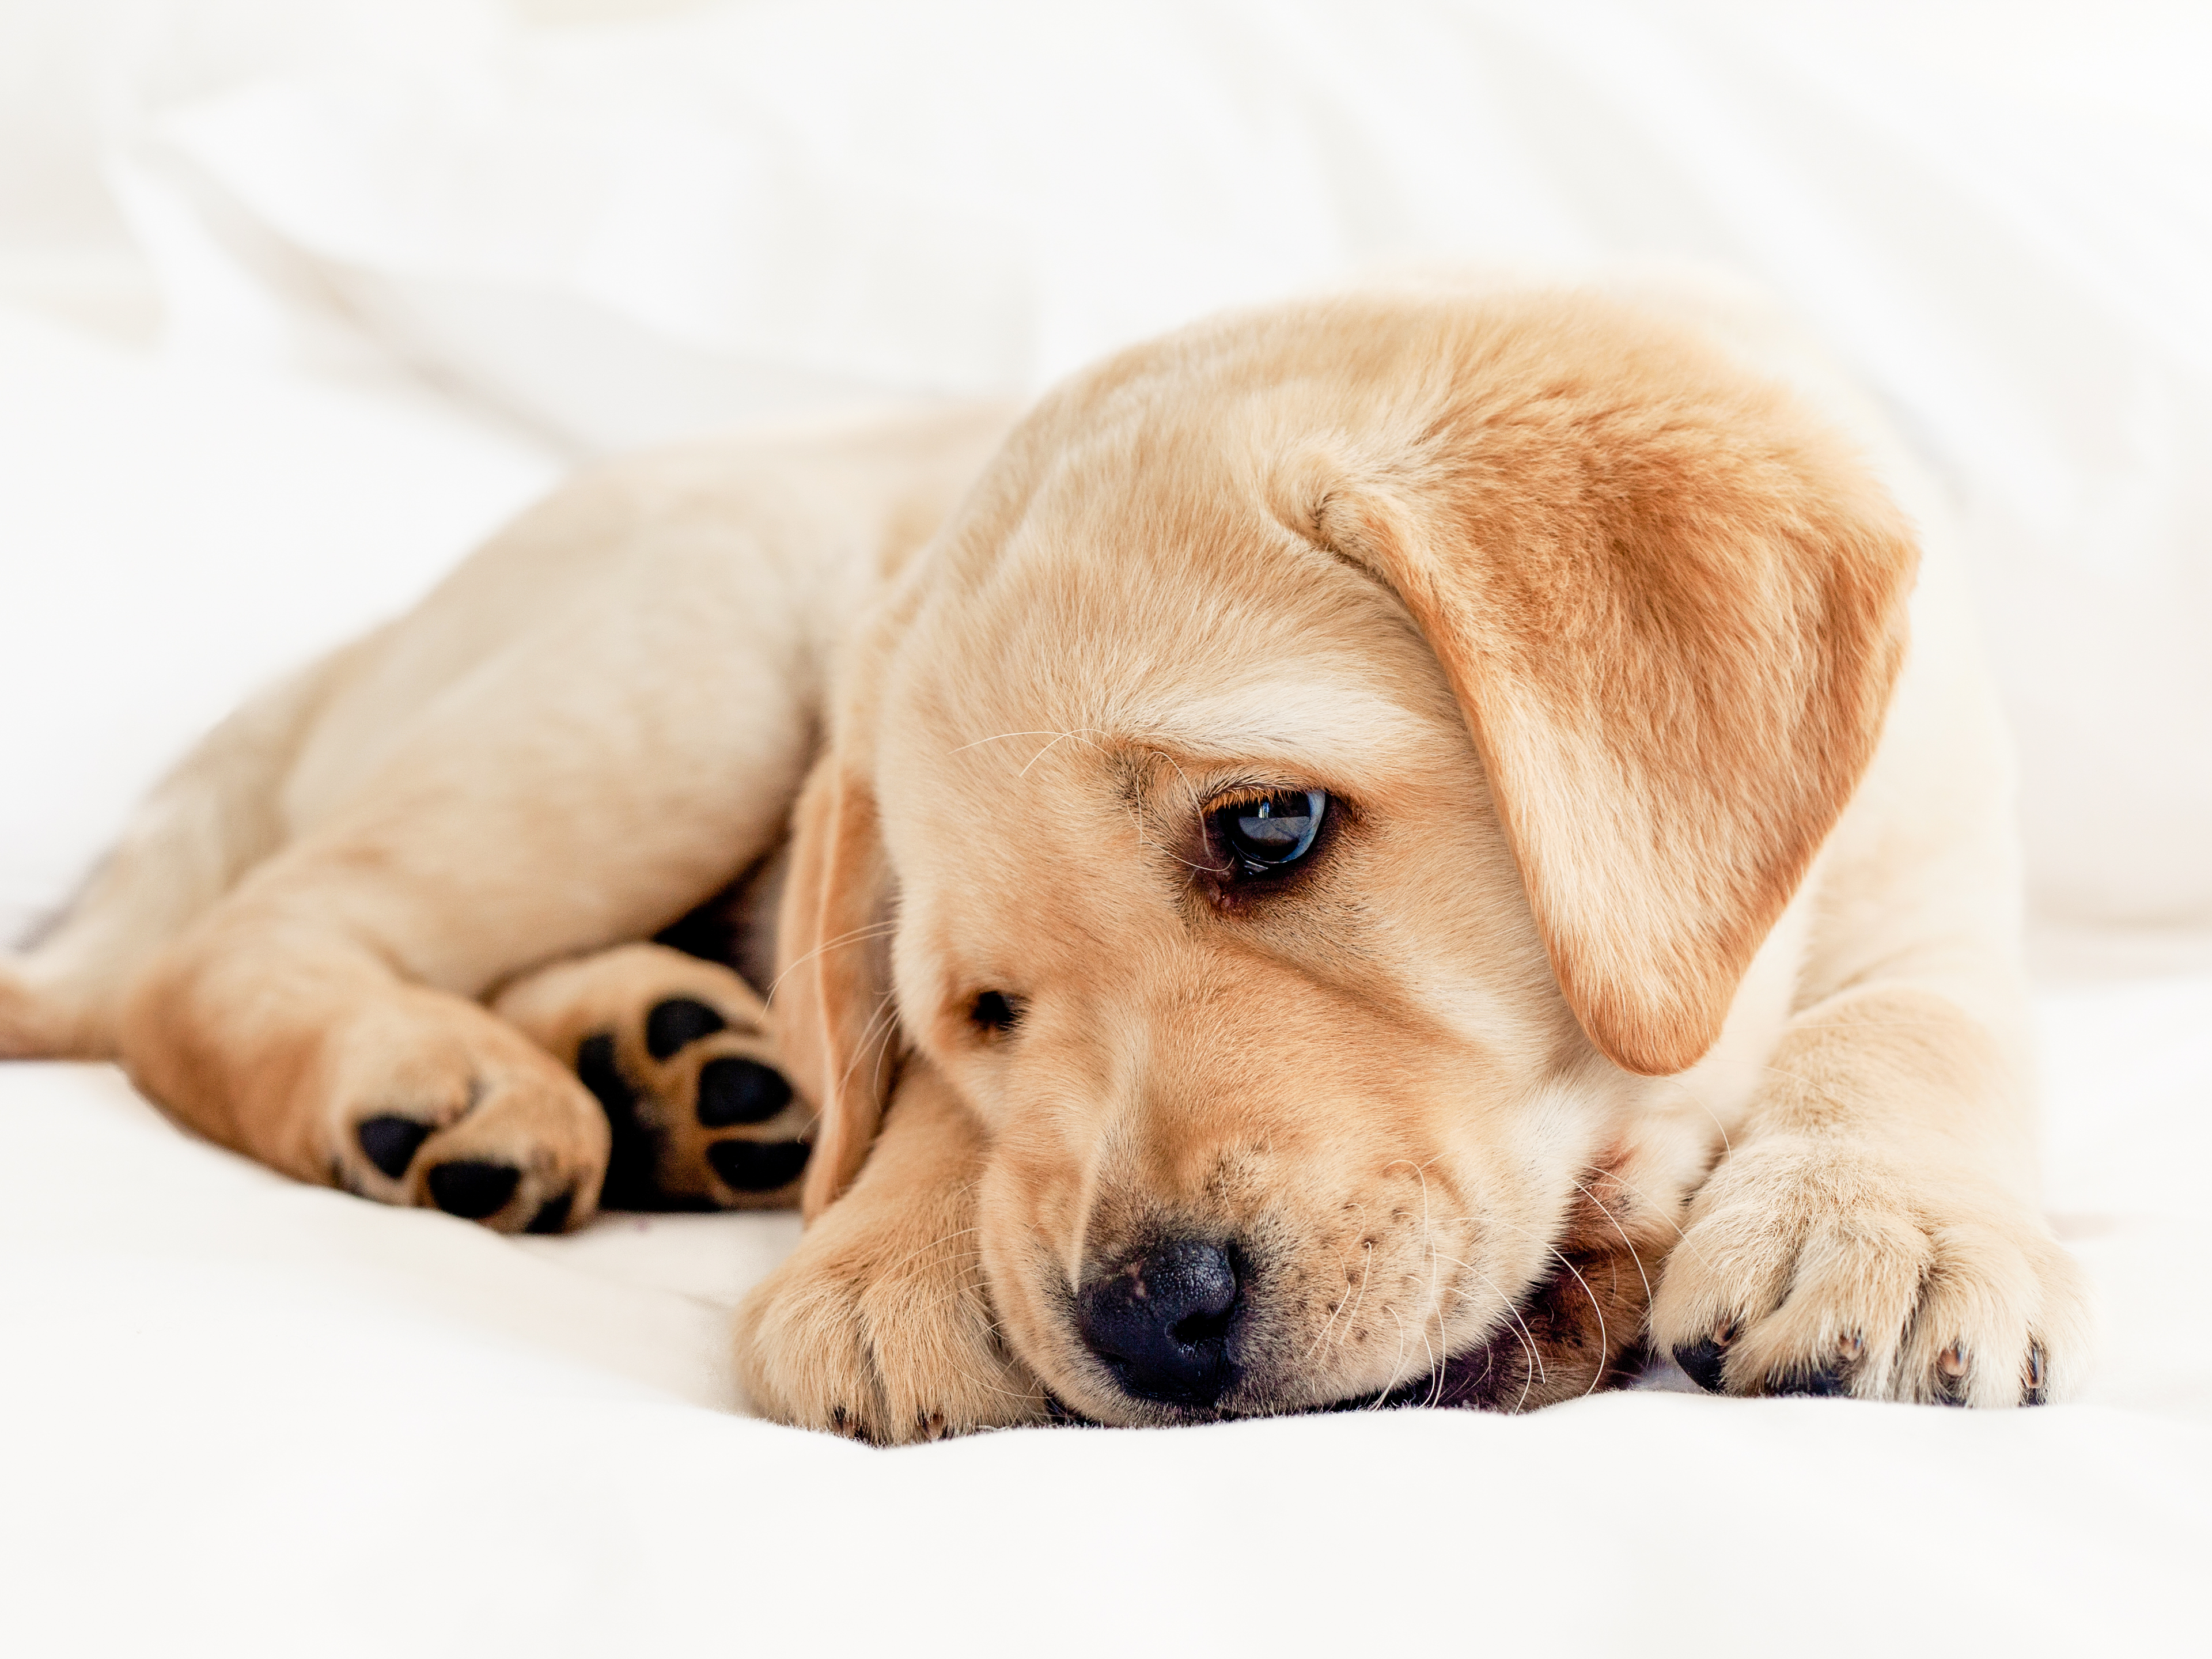 Labrador Retriever puppy lying down on a white bed